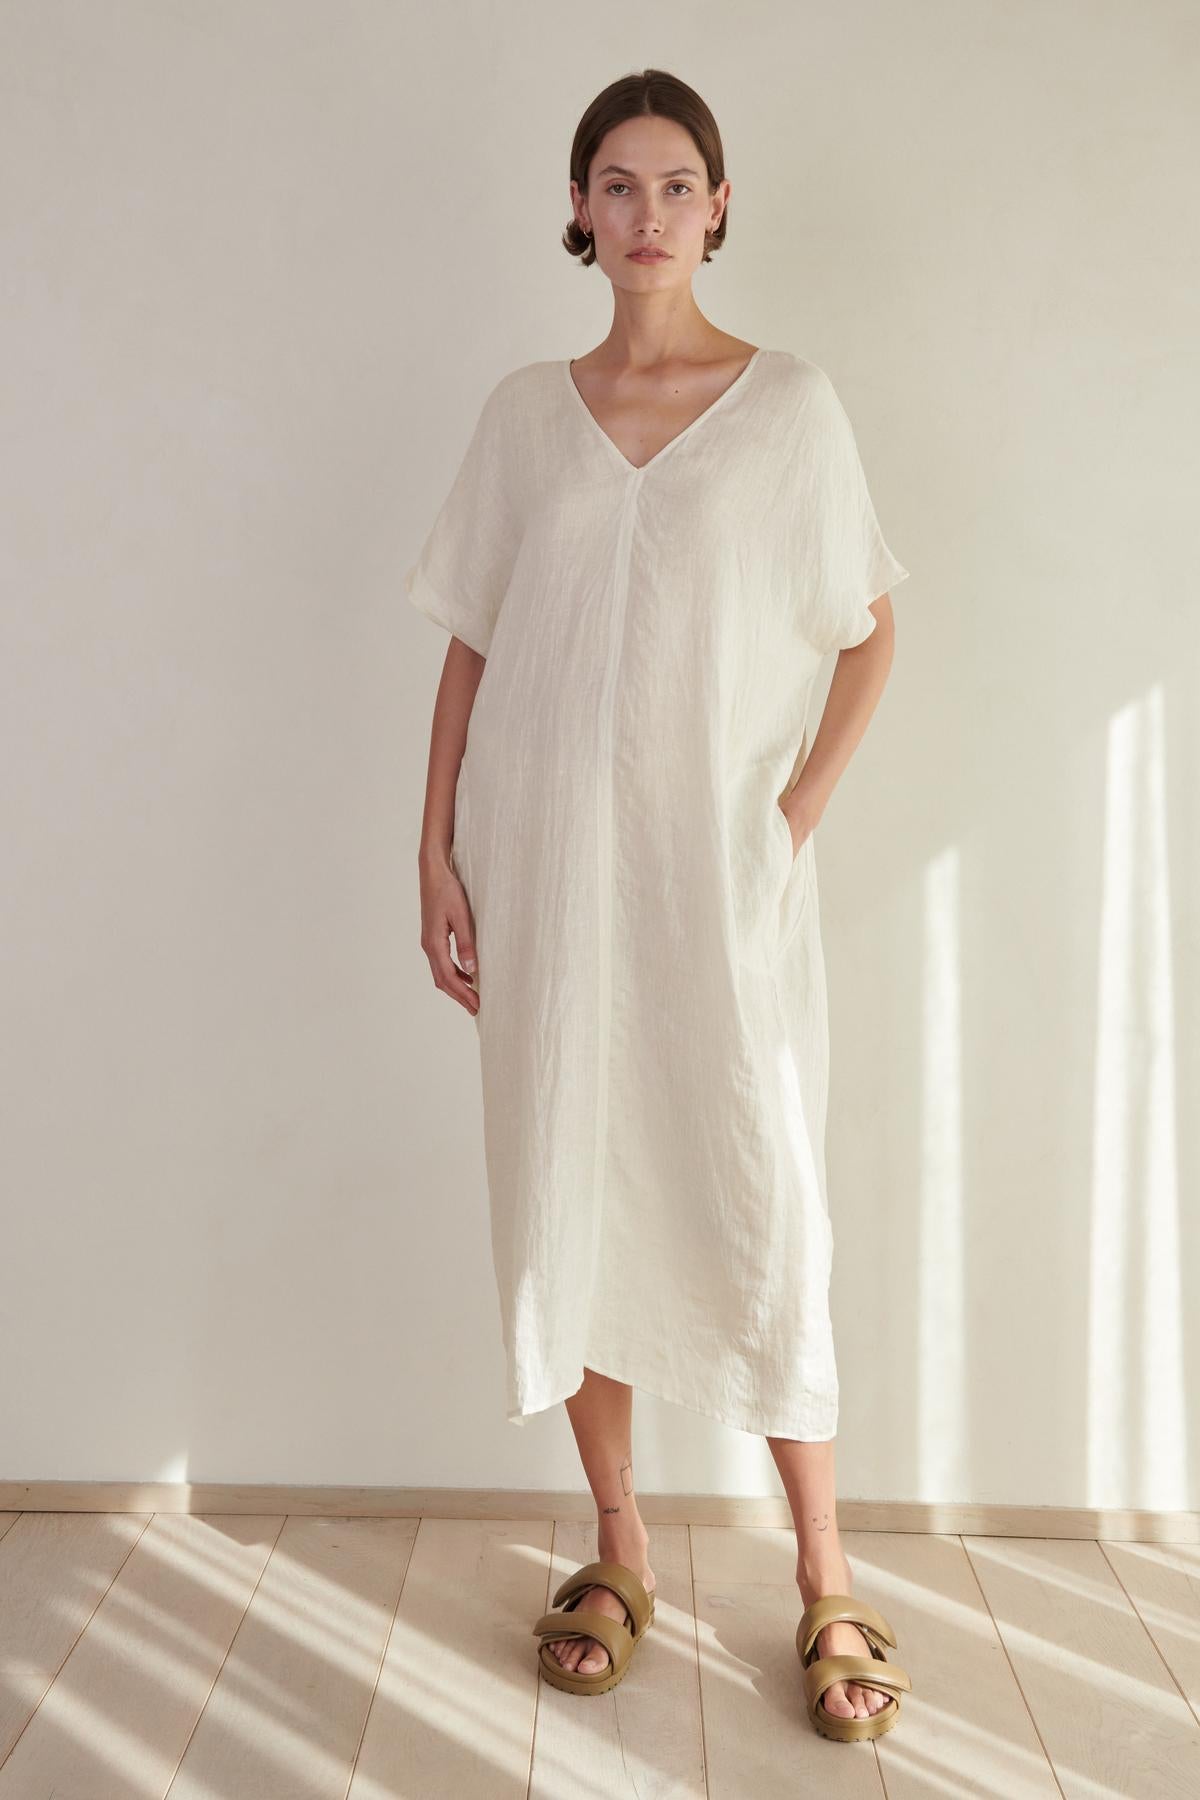 A woman wearing a long, white MONTANA LINEN DRESS with a V neckline and gold sandals stands in a softly lit room with a wooden floor. (Brand Name: Velvet by Jenny Graham)-26293194850497